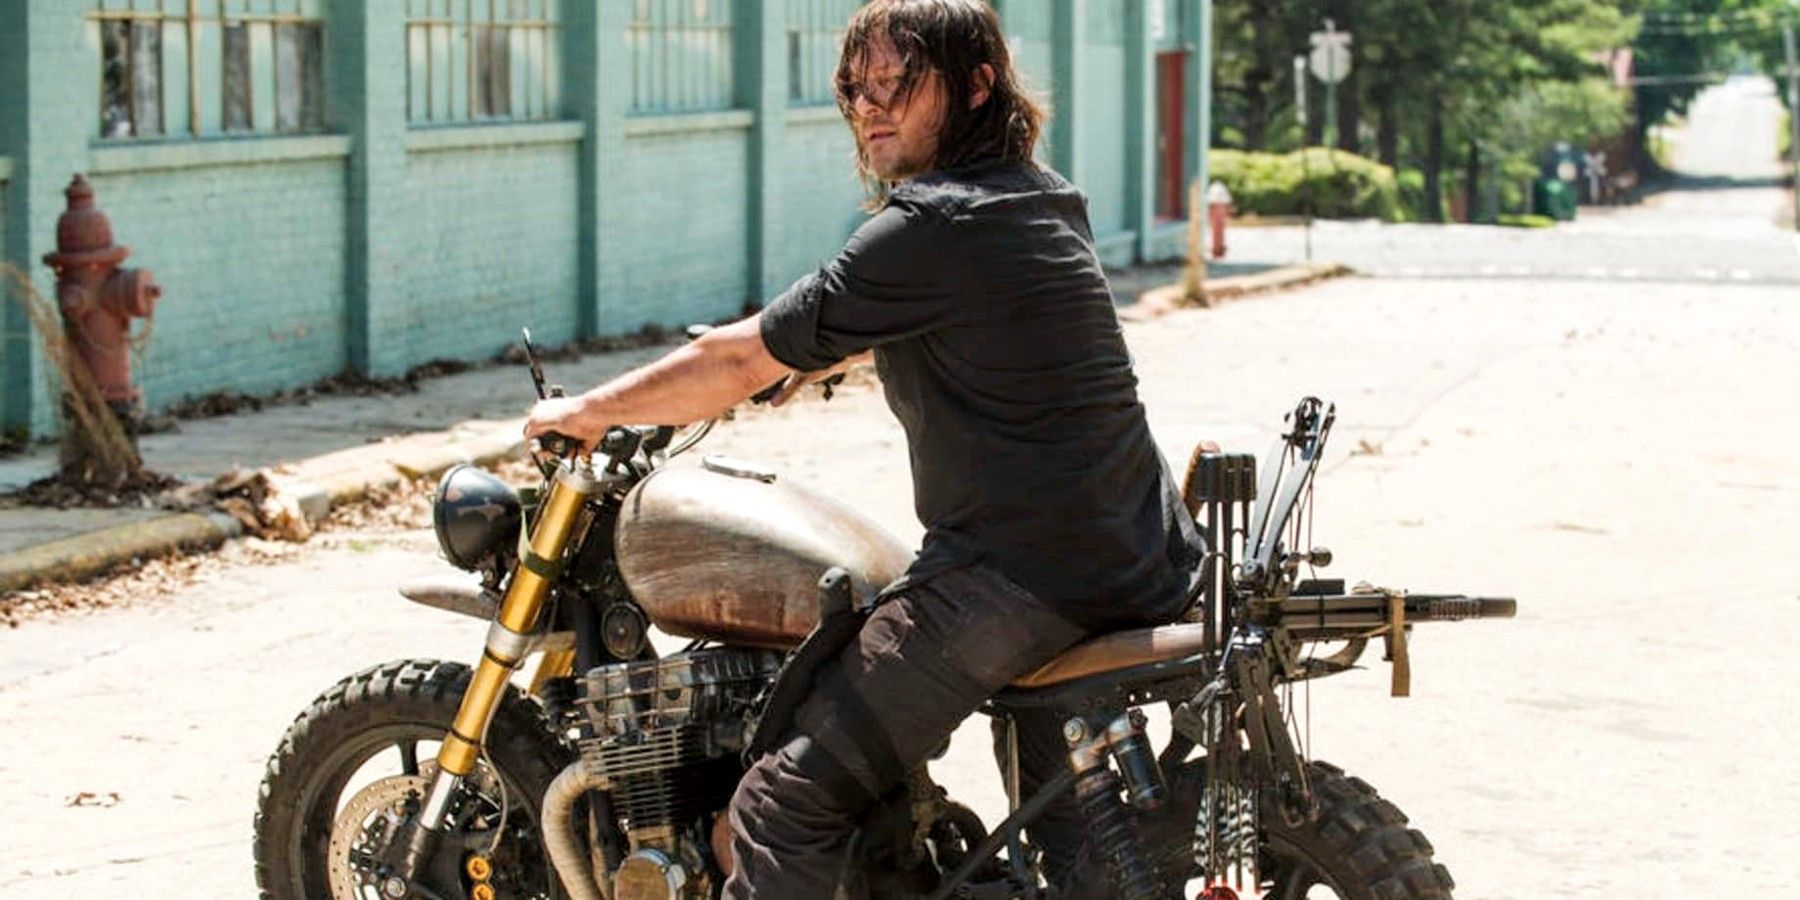 Daryl on motorcycle in The Walking Dead